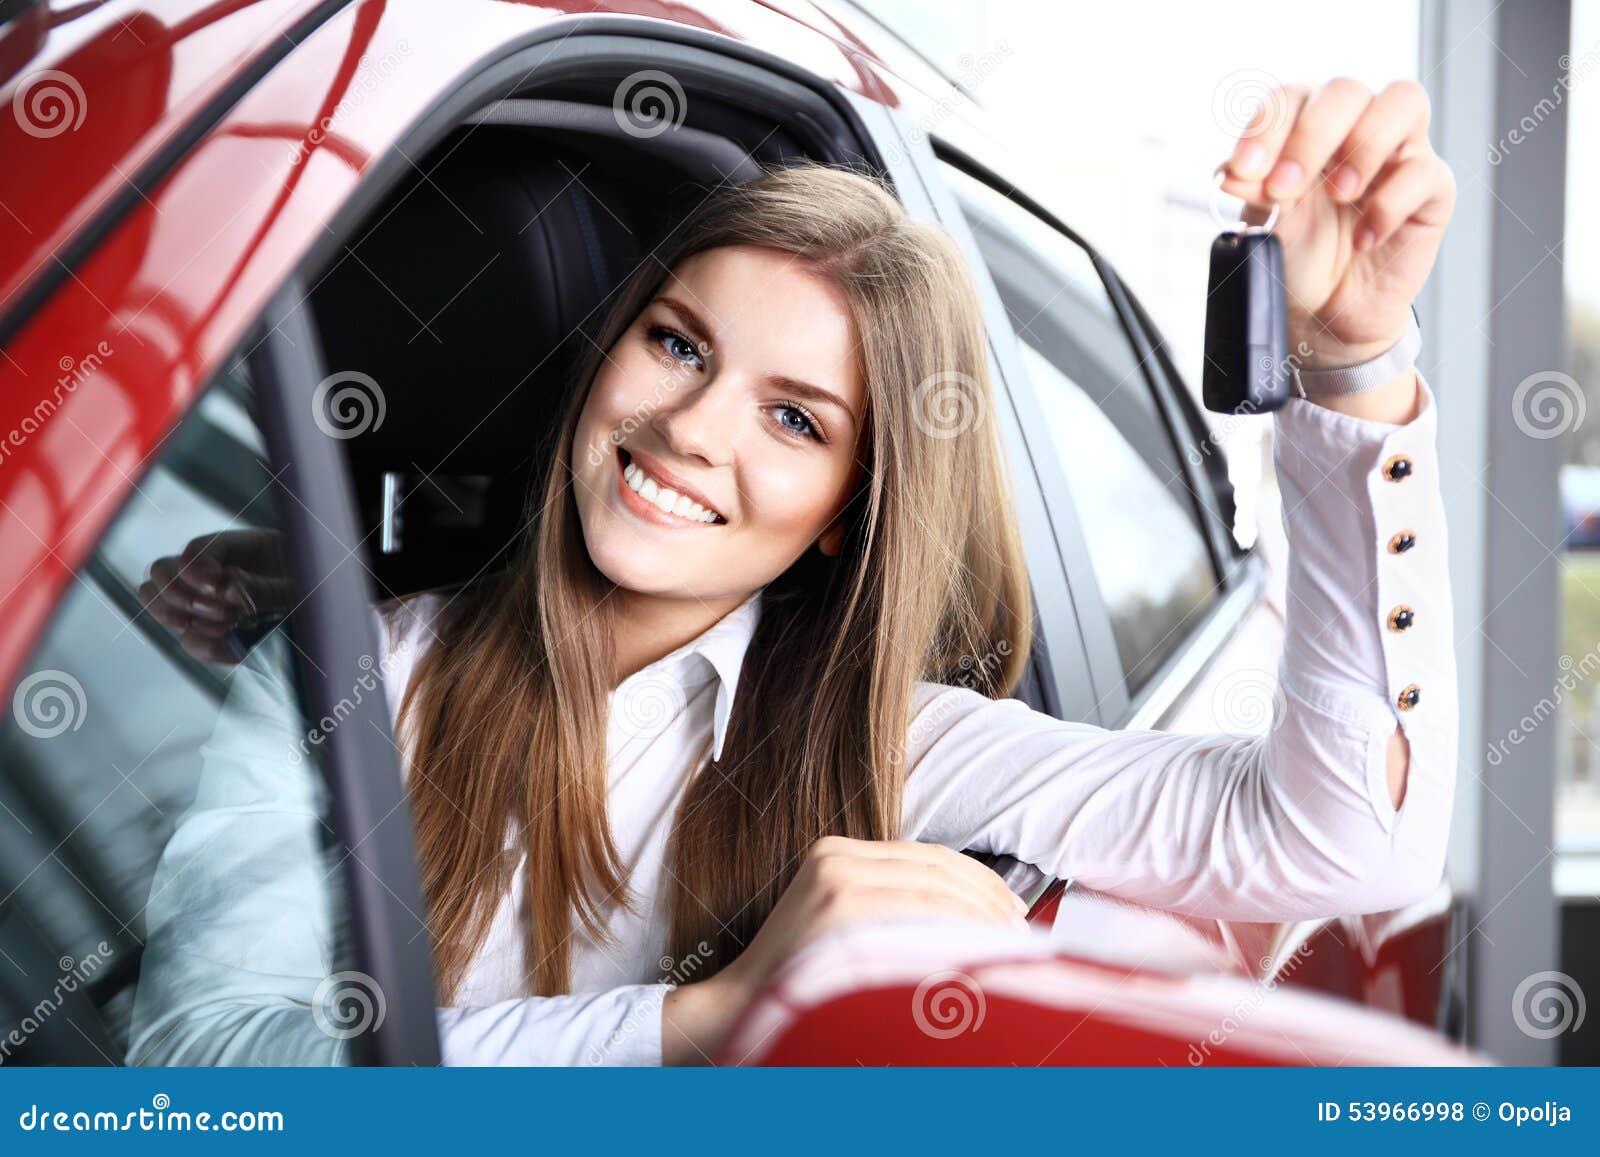 woman driver holding car keys siting in new car